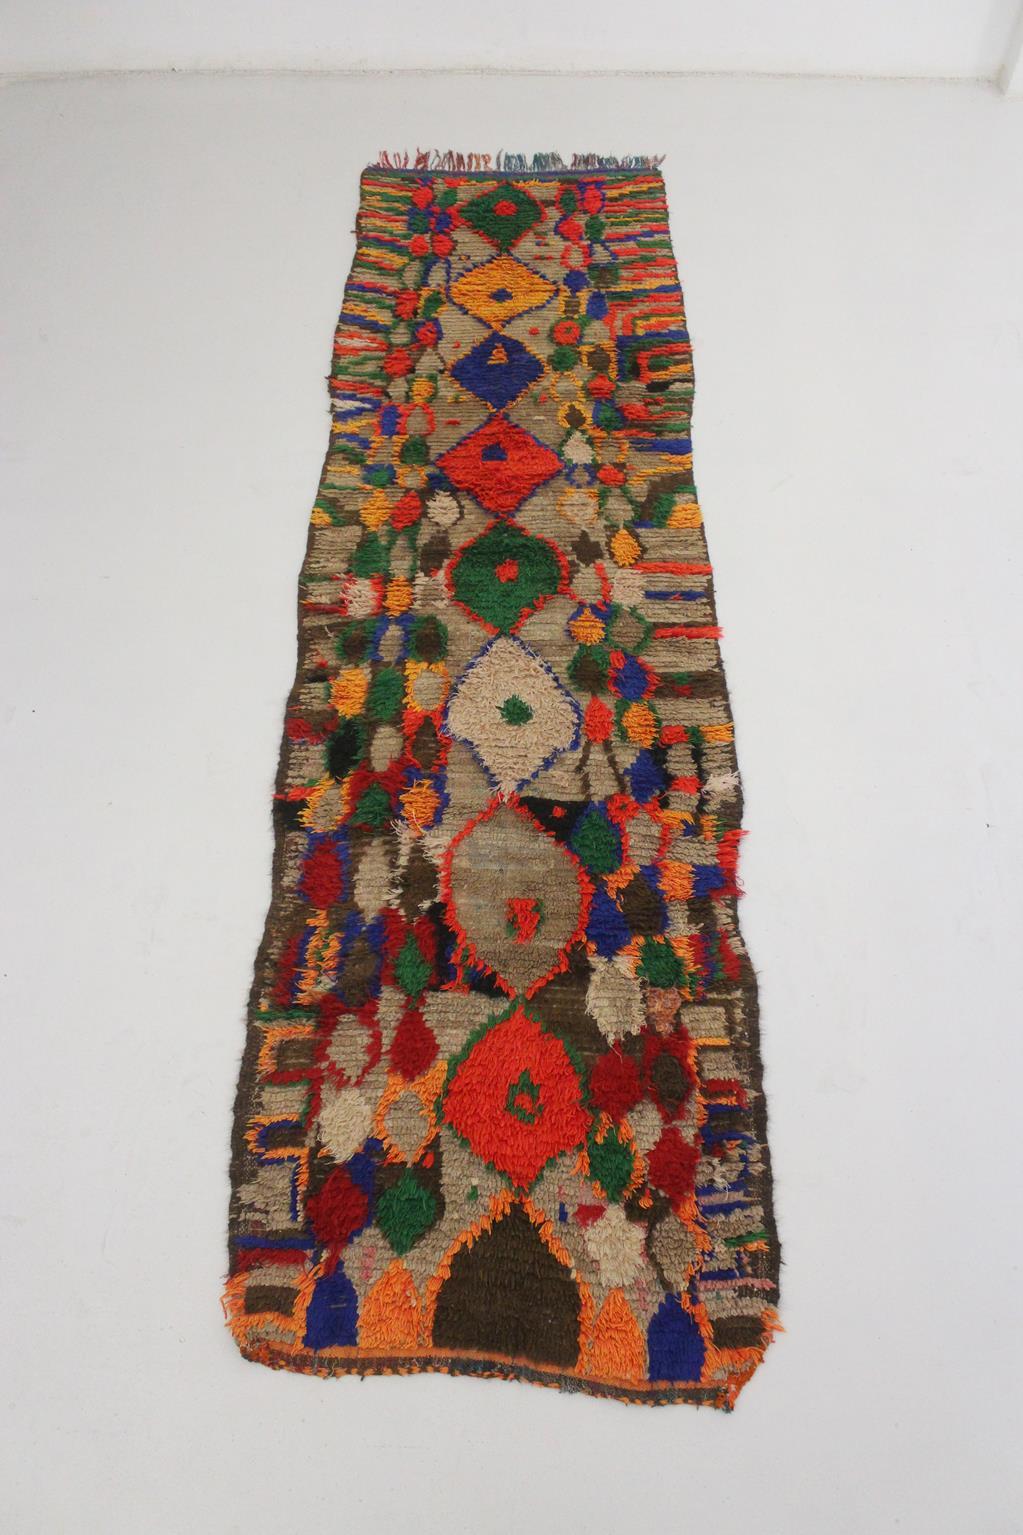 This long runner rug was hung on a wall at the vintage market in Marrakech the first time I saw it. I could appreciate its beauty at the first sight and it was an immediate yes for me!

Probably made in the area of Boujad, Middle Atlas, Morocco, the